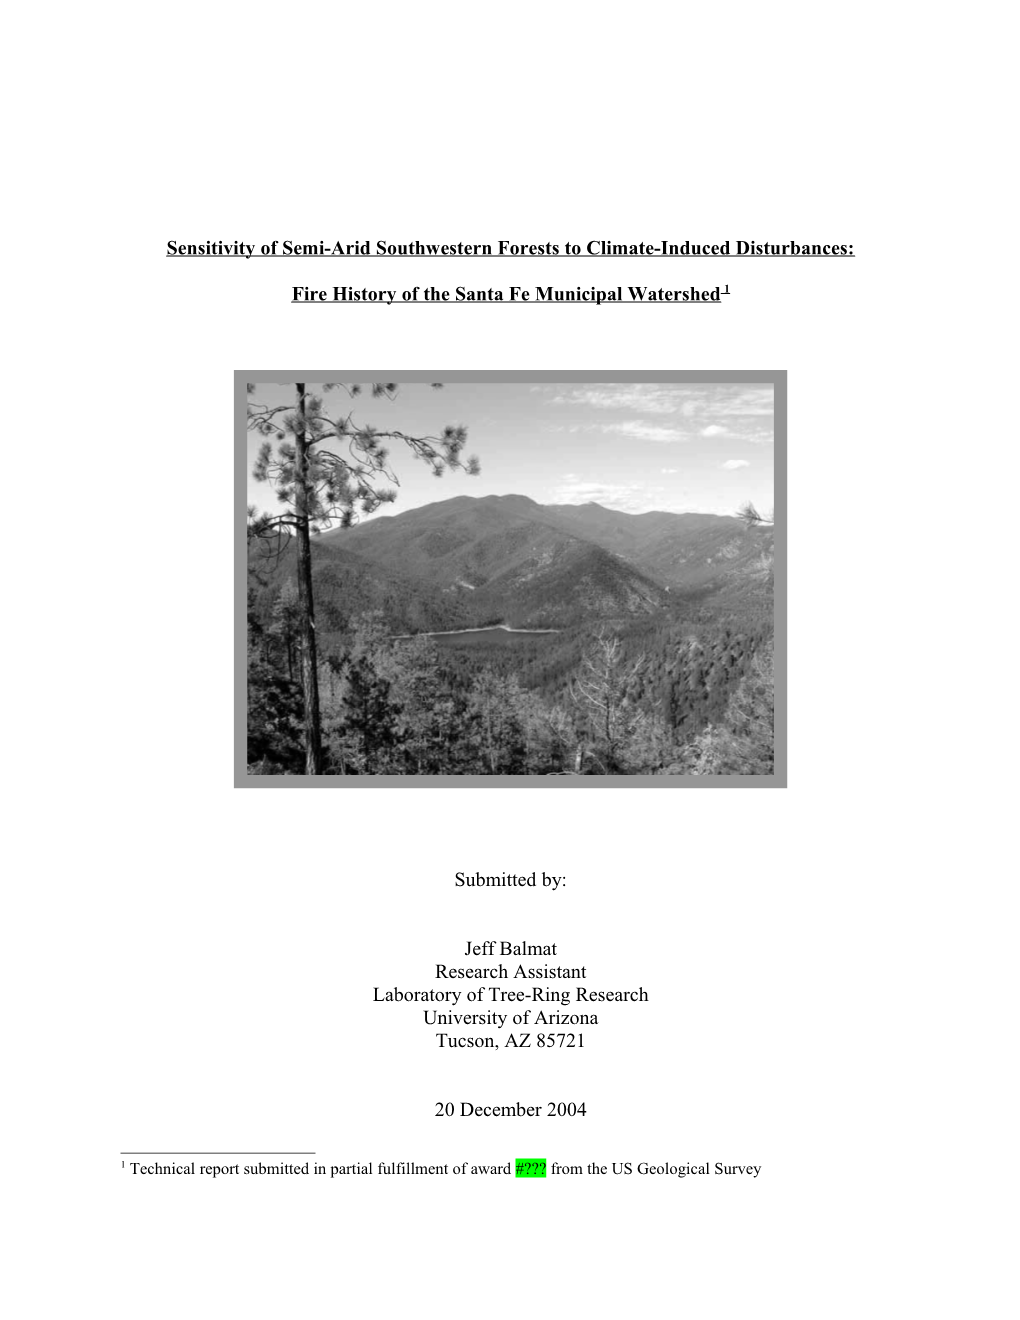 Sensitivity of Semi-Arid Southwestern Forests to Climate-Induced Disturbances